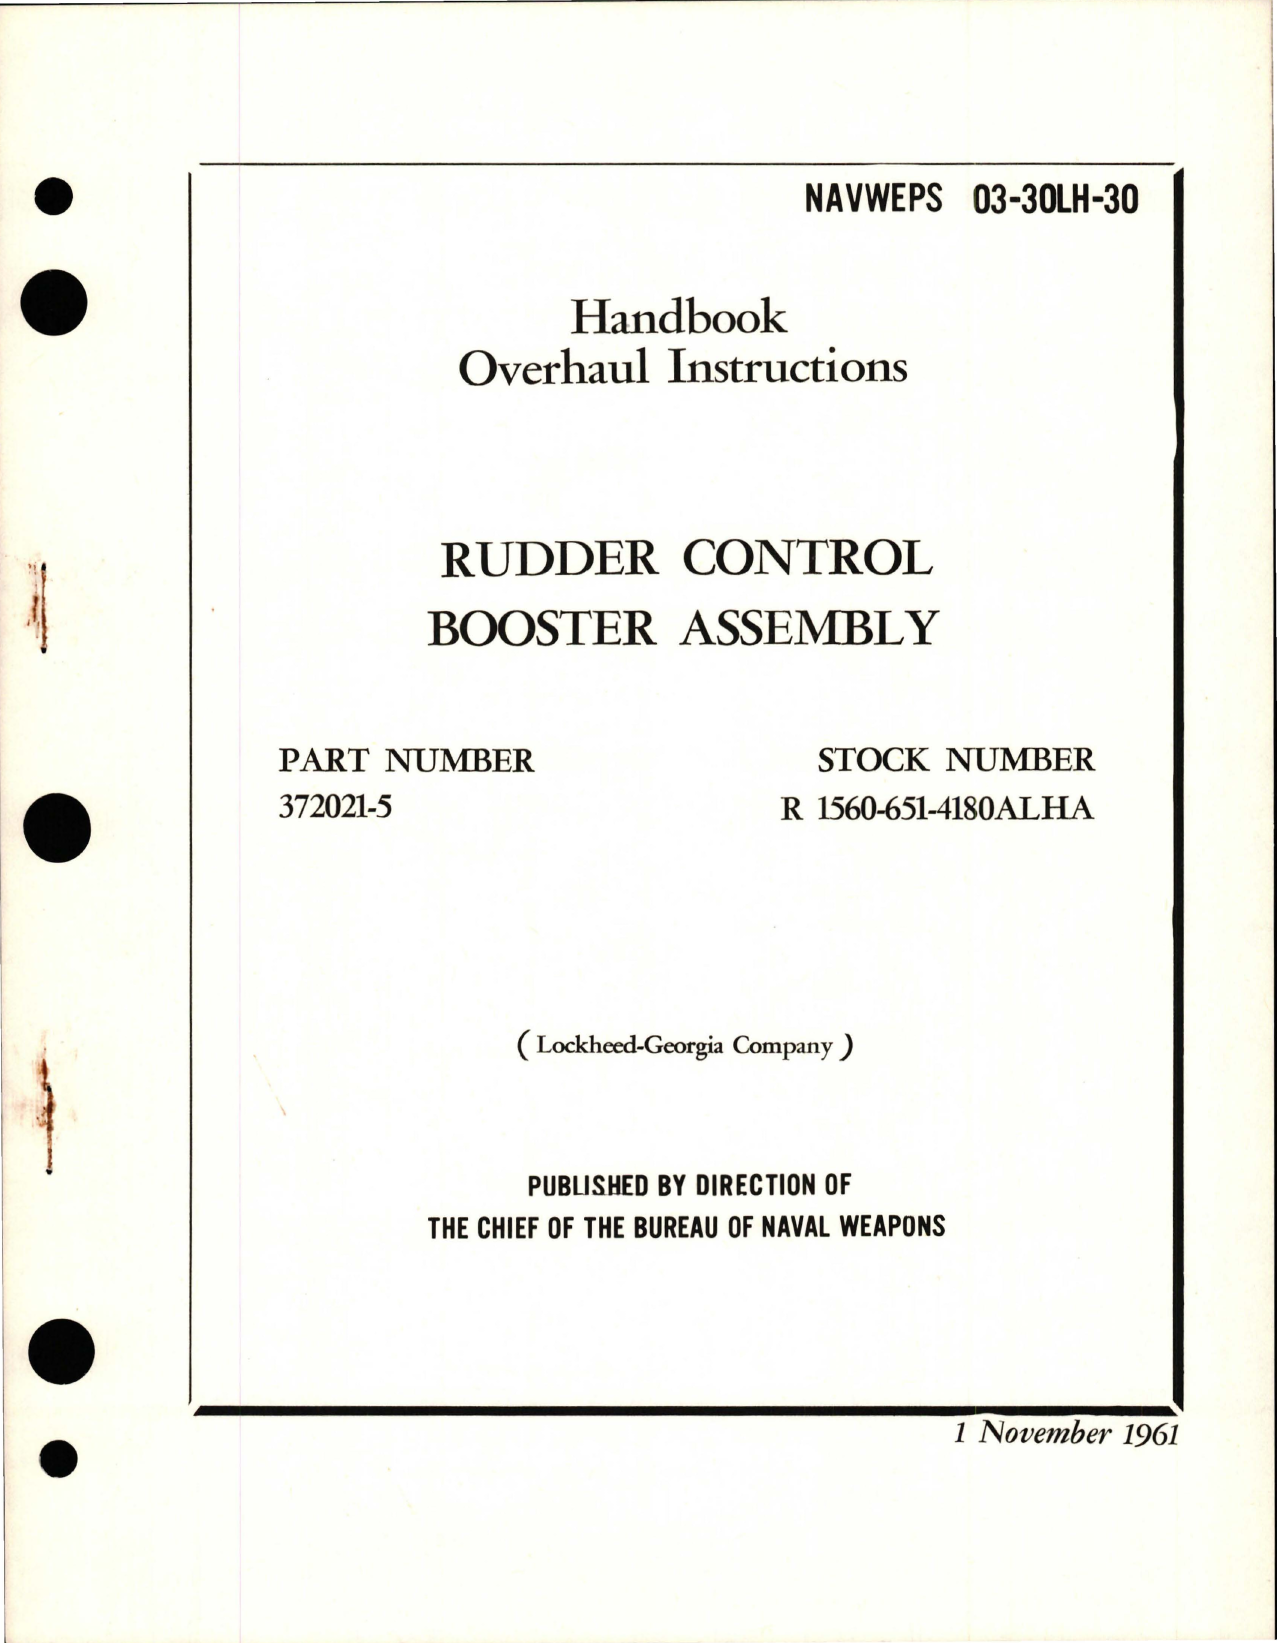 Sample page 1 from AirCorps Library document: Overhaul Instructions for Rudder Control Booster Assembly - Part 372021-5 